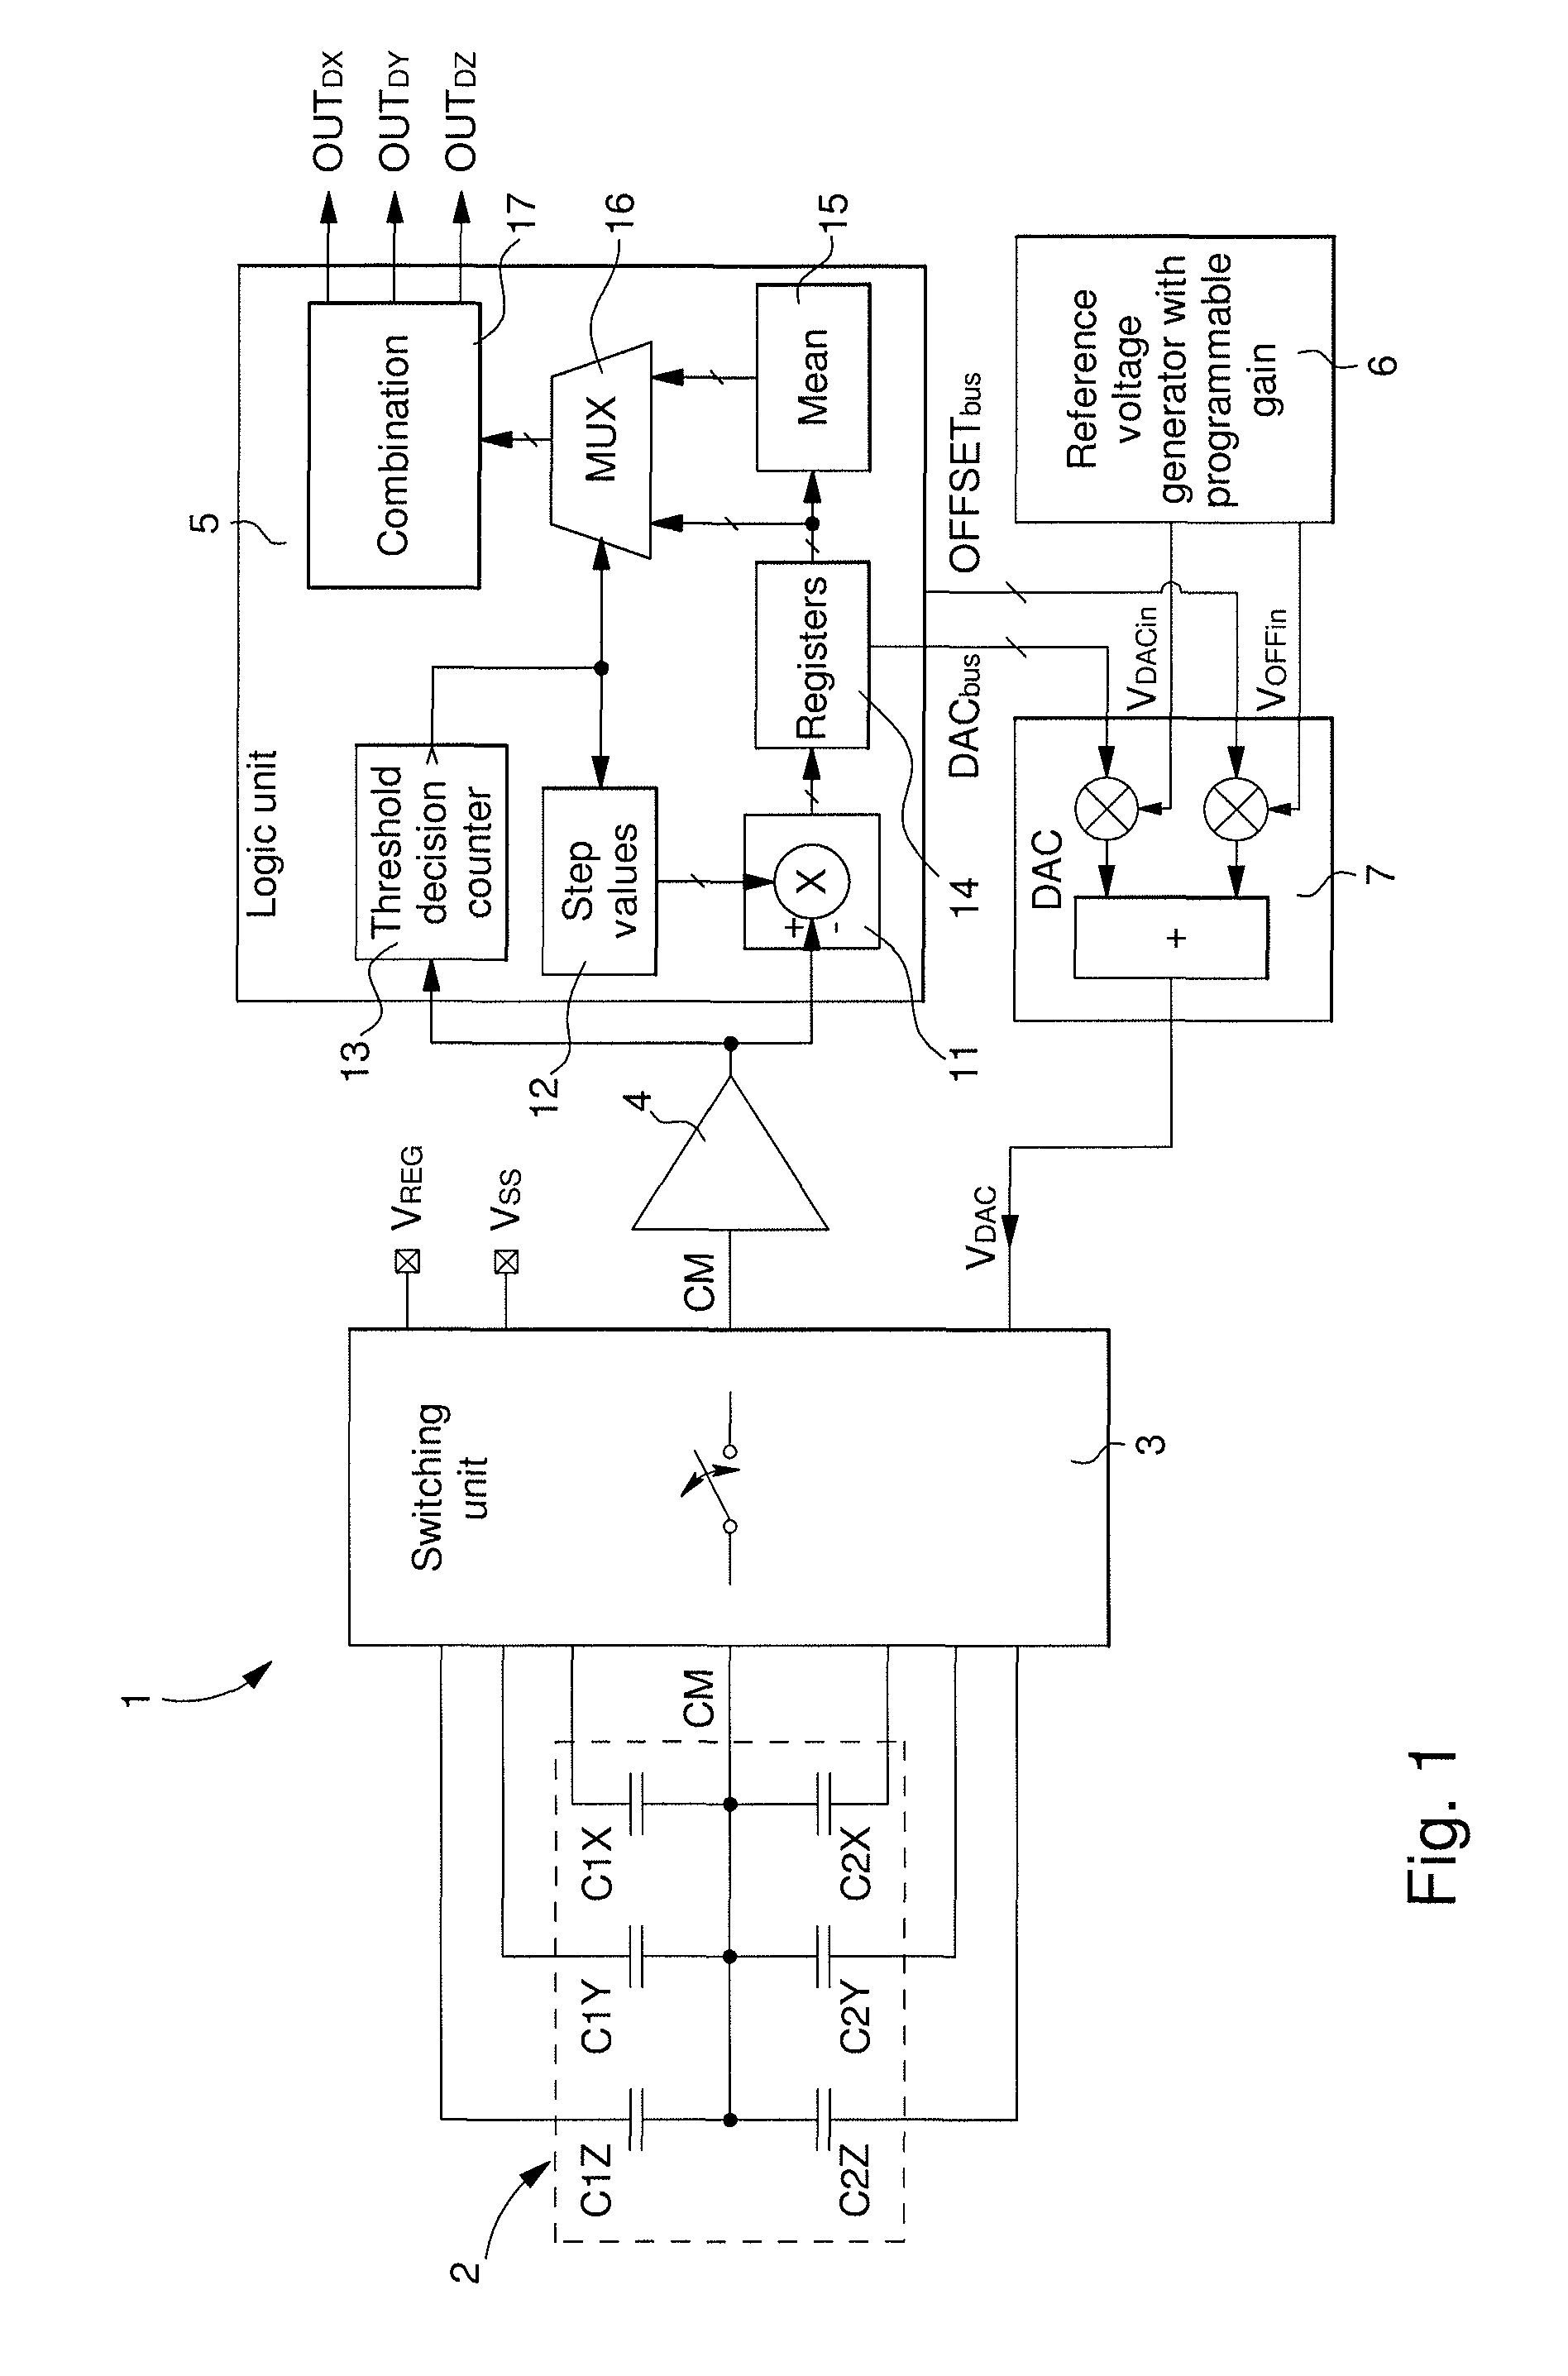 Method of measuring a physical parameter and electronic interface circuit for a capacitive sensor for implementing the same